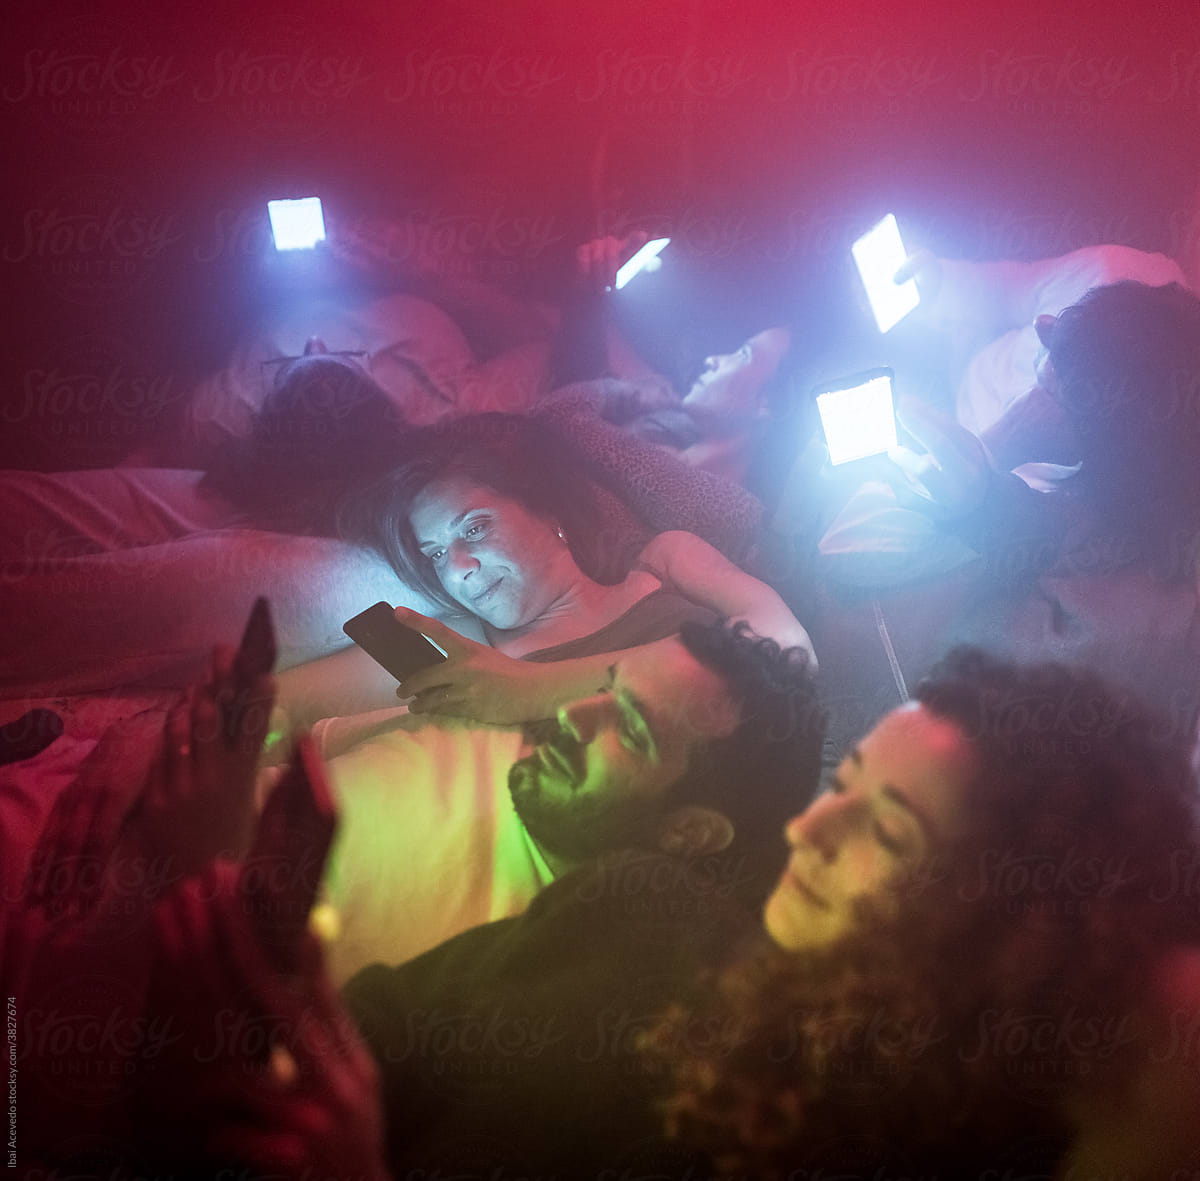 Everyone checking phones during the party